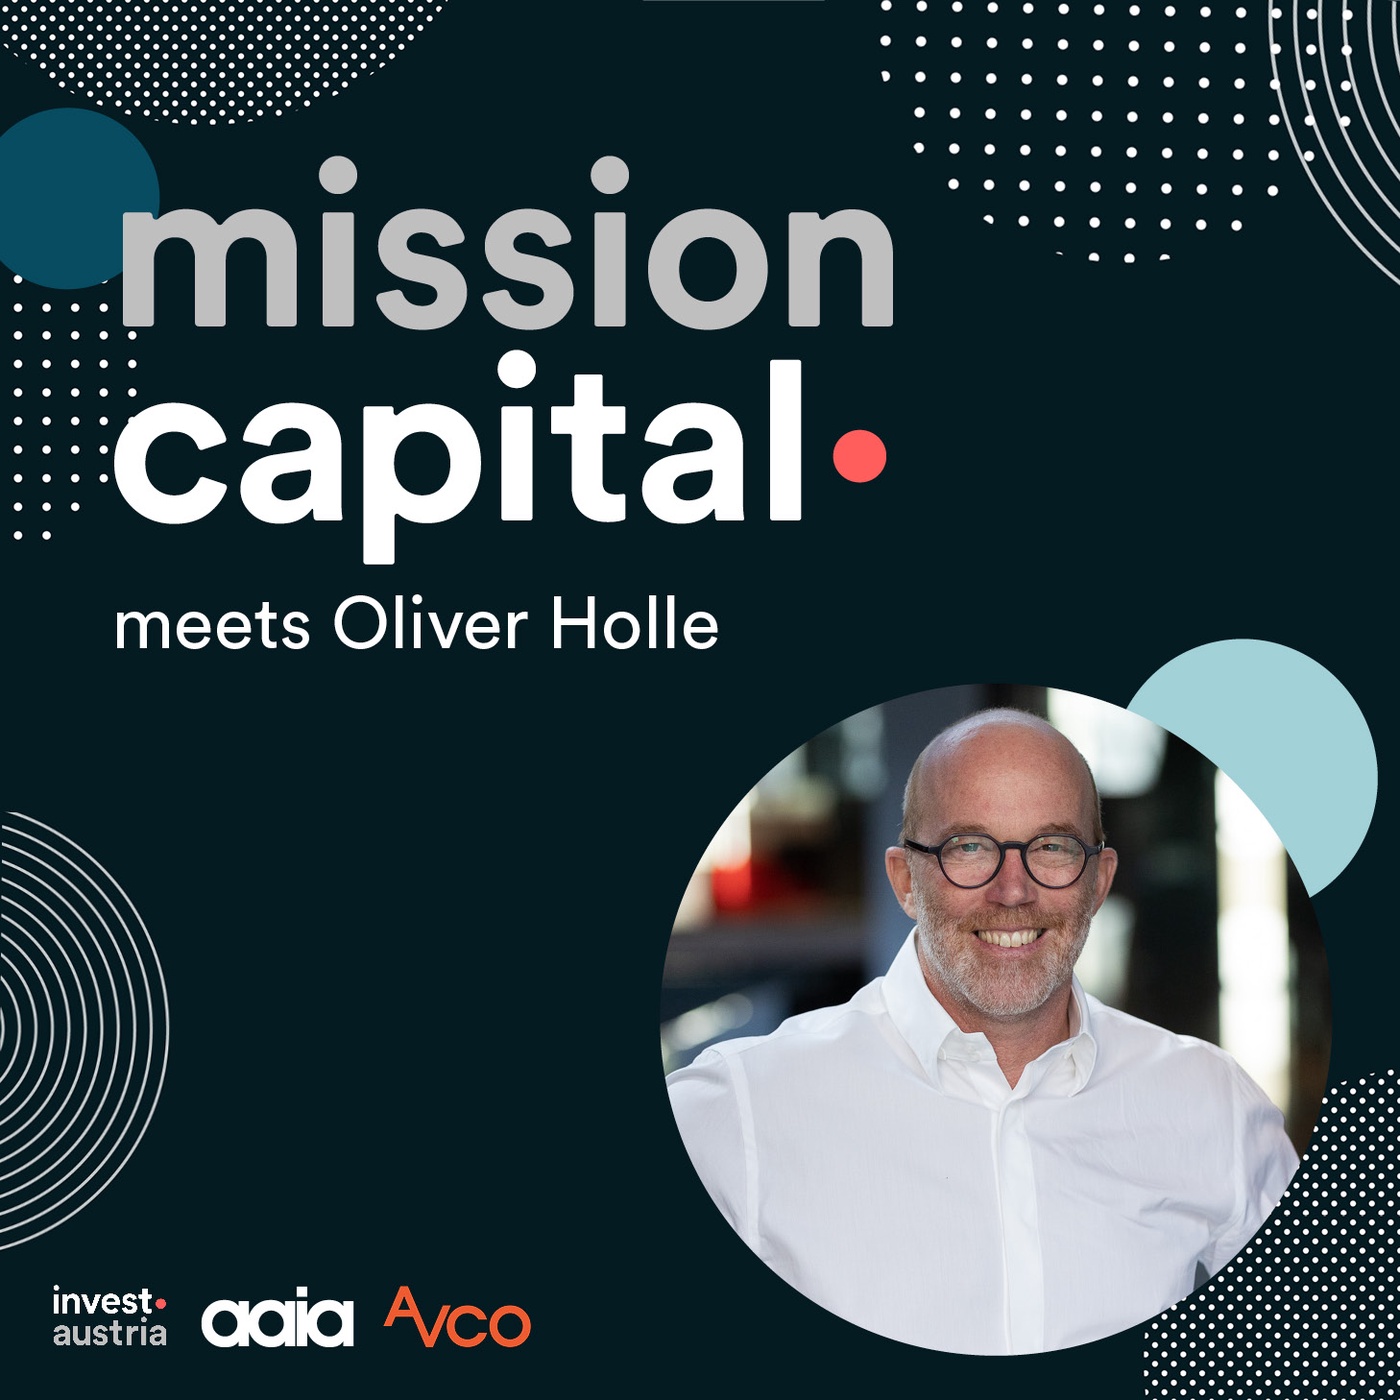 #3 mission capital meets Oliver Holle